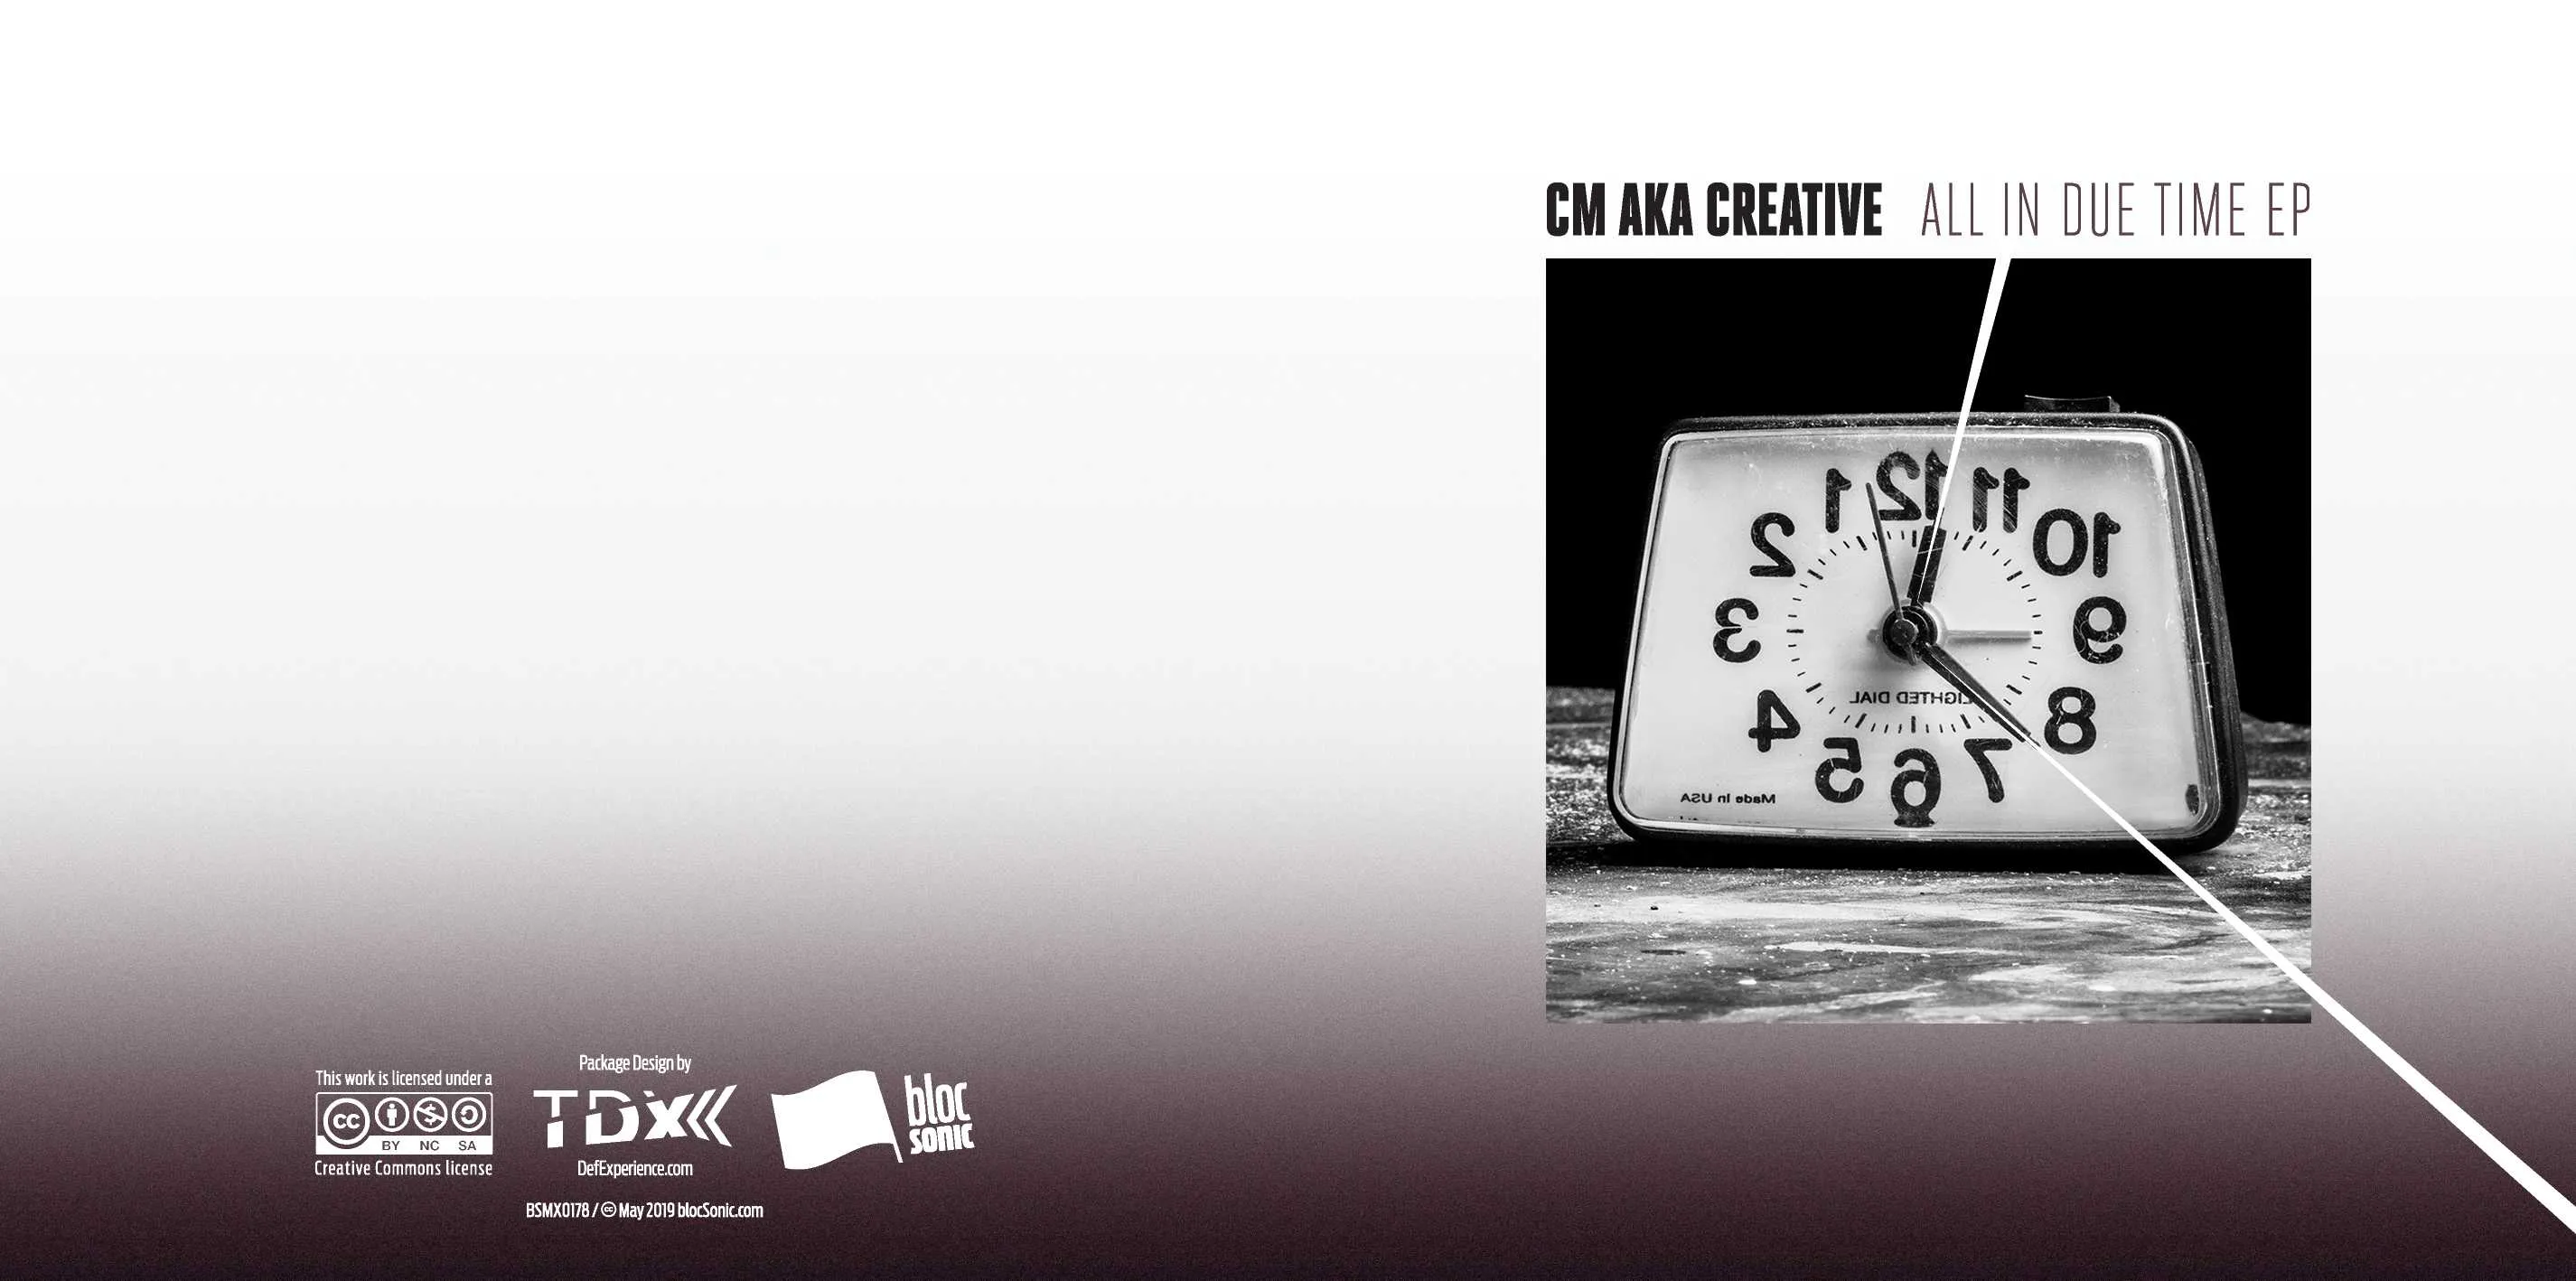 Album insert for “All In Due Time EP” by CM aka Creative